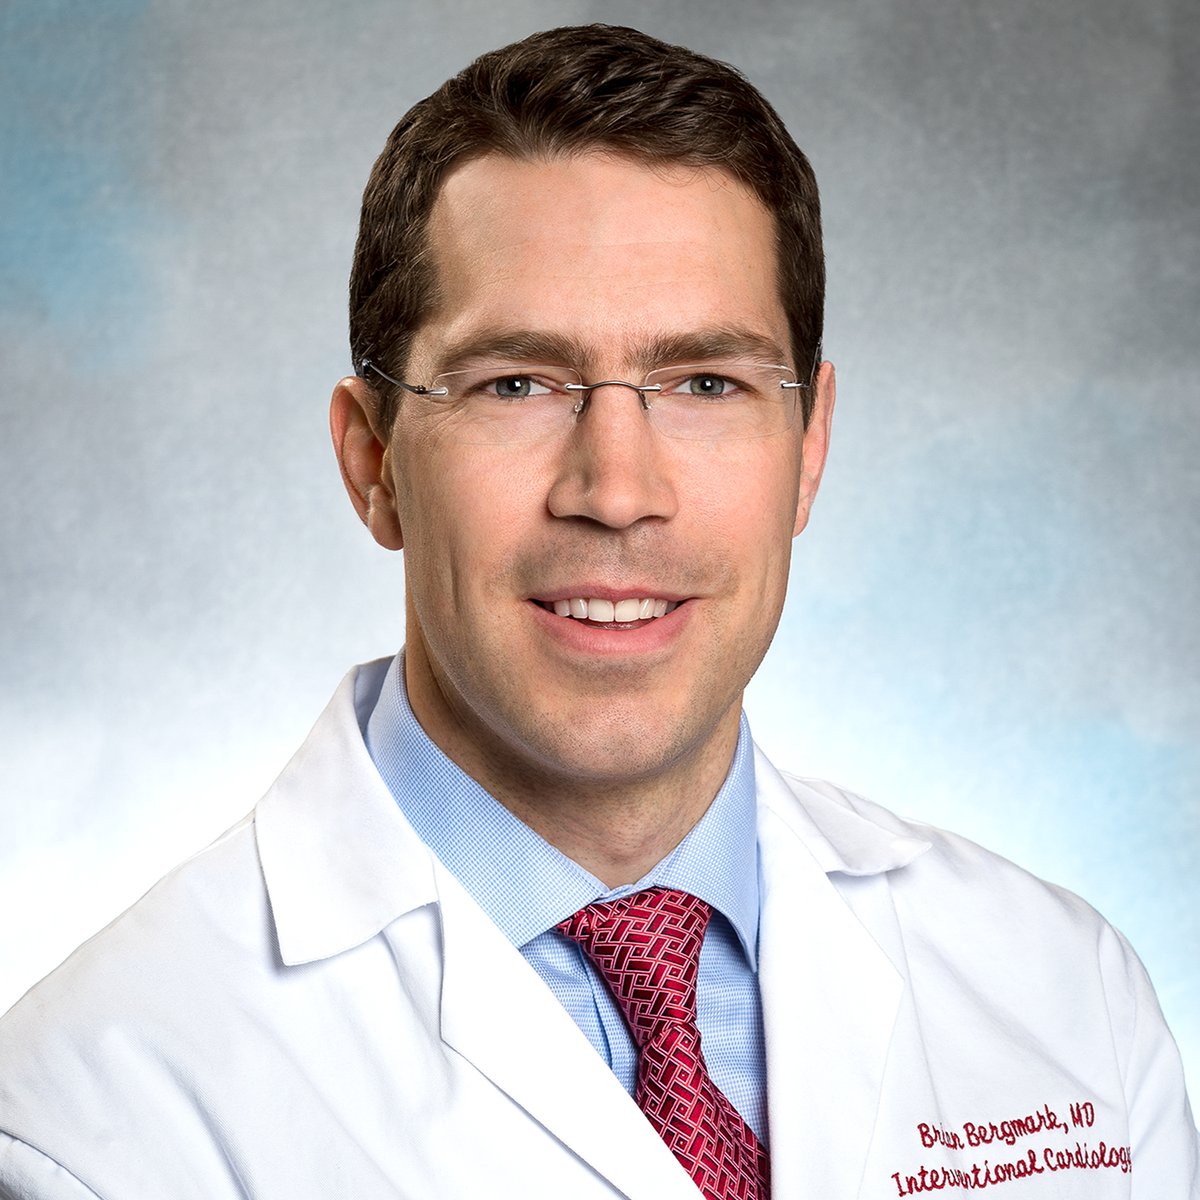 Our own @BrianBergmark, who was recently promoted to Assistant Professor of Medicine at Harvard Medical School, has just been named as a 2023 winner of @SCAI 's 30 in Their 30s award! Congratulations, Brian!